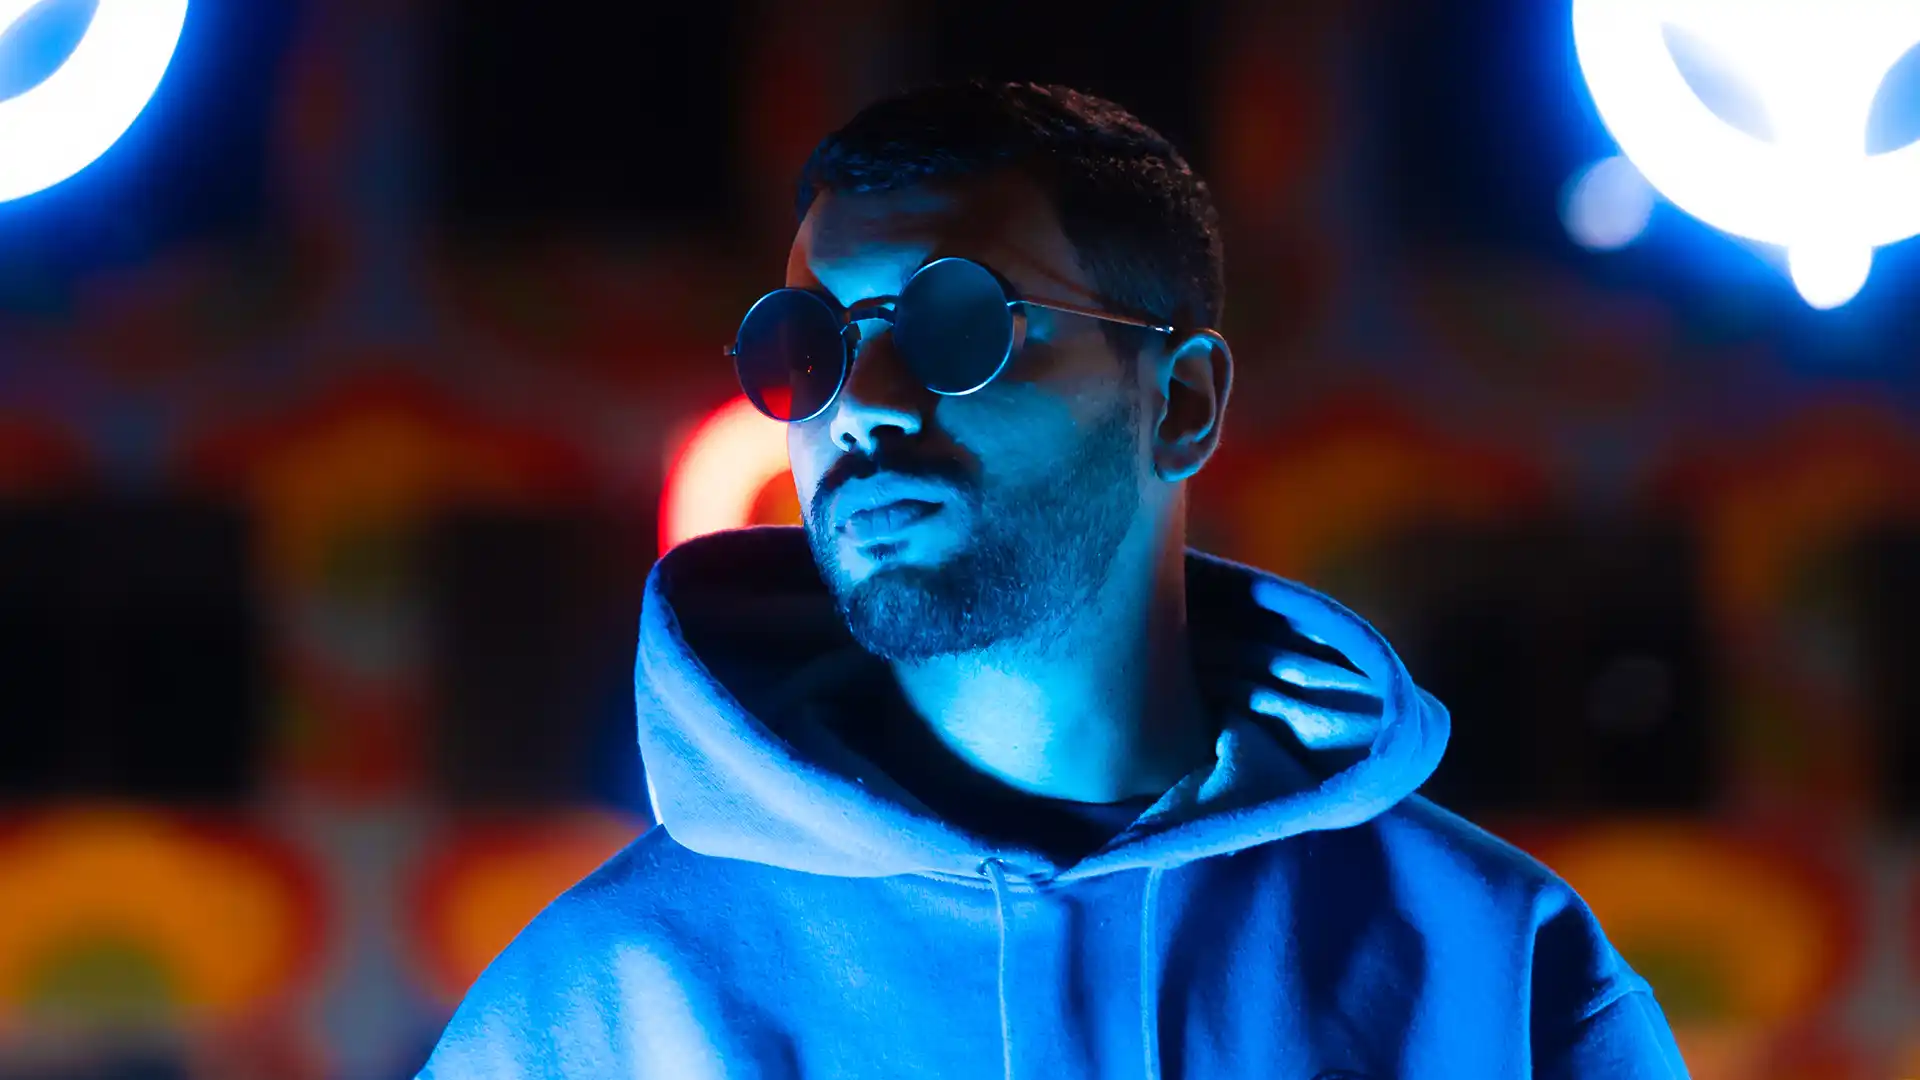 Artist SPE3D standing confidently in front of vibrant neon lights, wearing sunglasses.